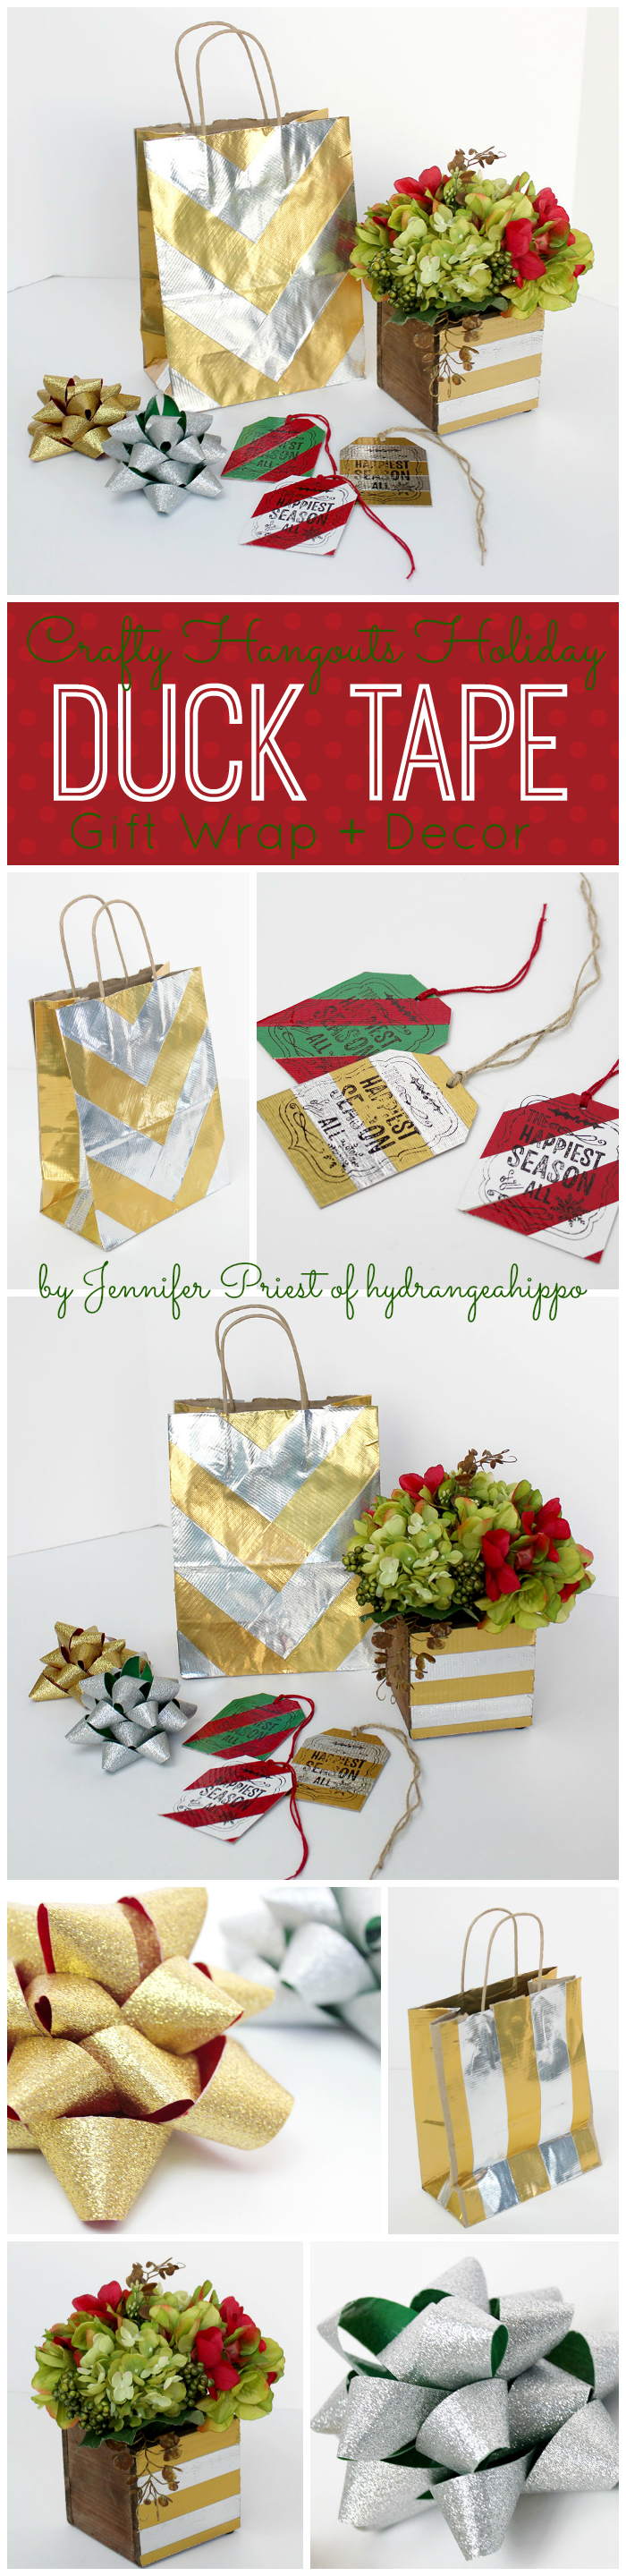 Christmas Holiday Duck Tape Projects by Jennifer Priest for hydrangeahippo Crafty Hangouts 1